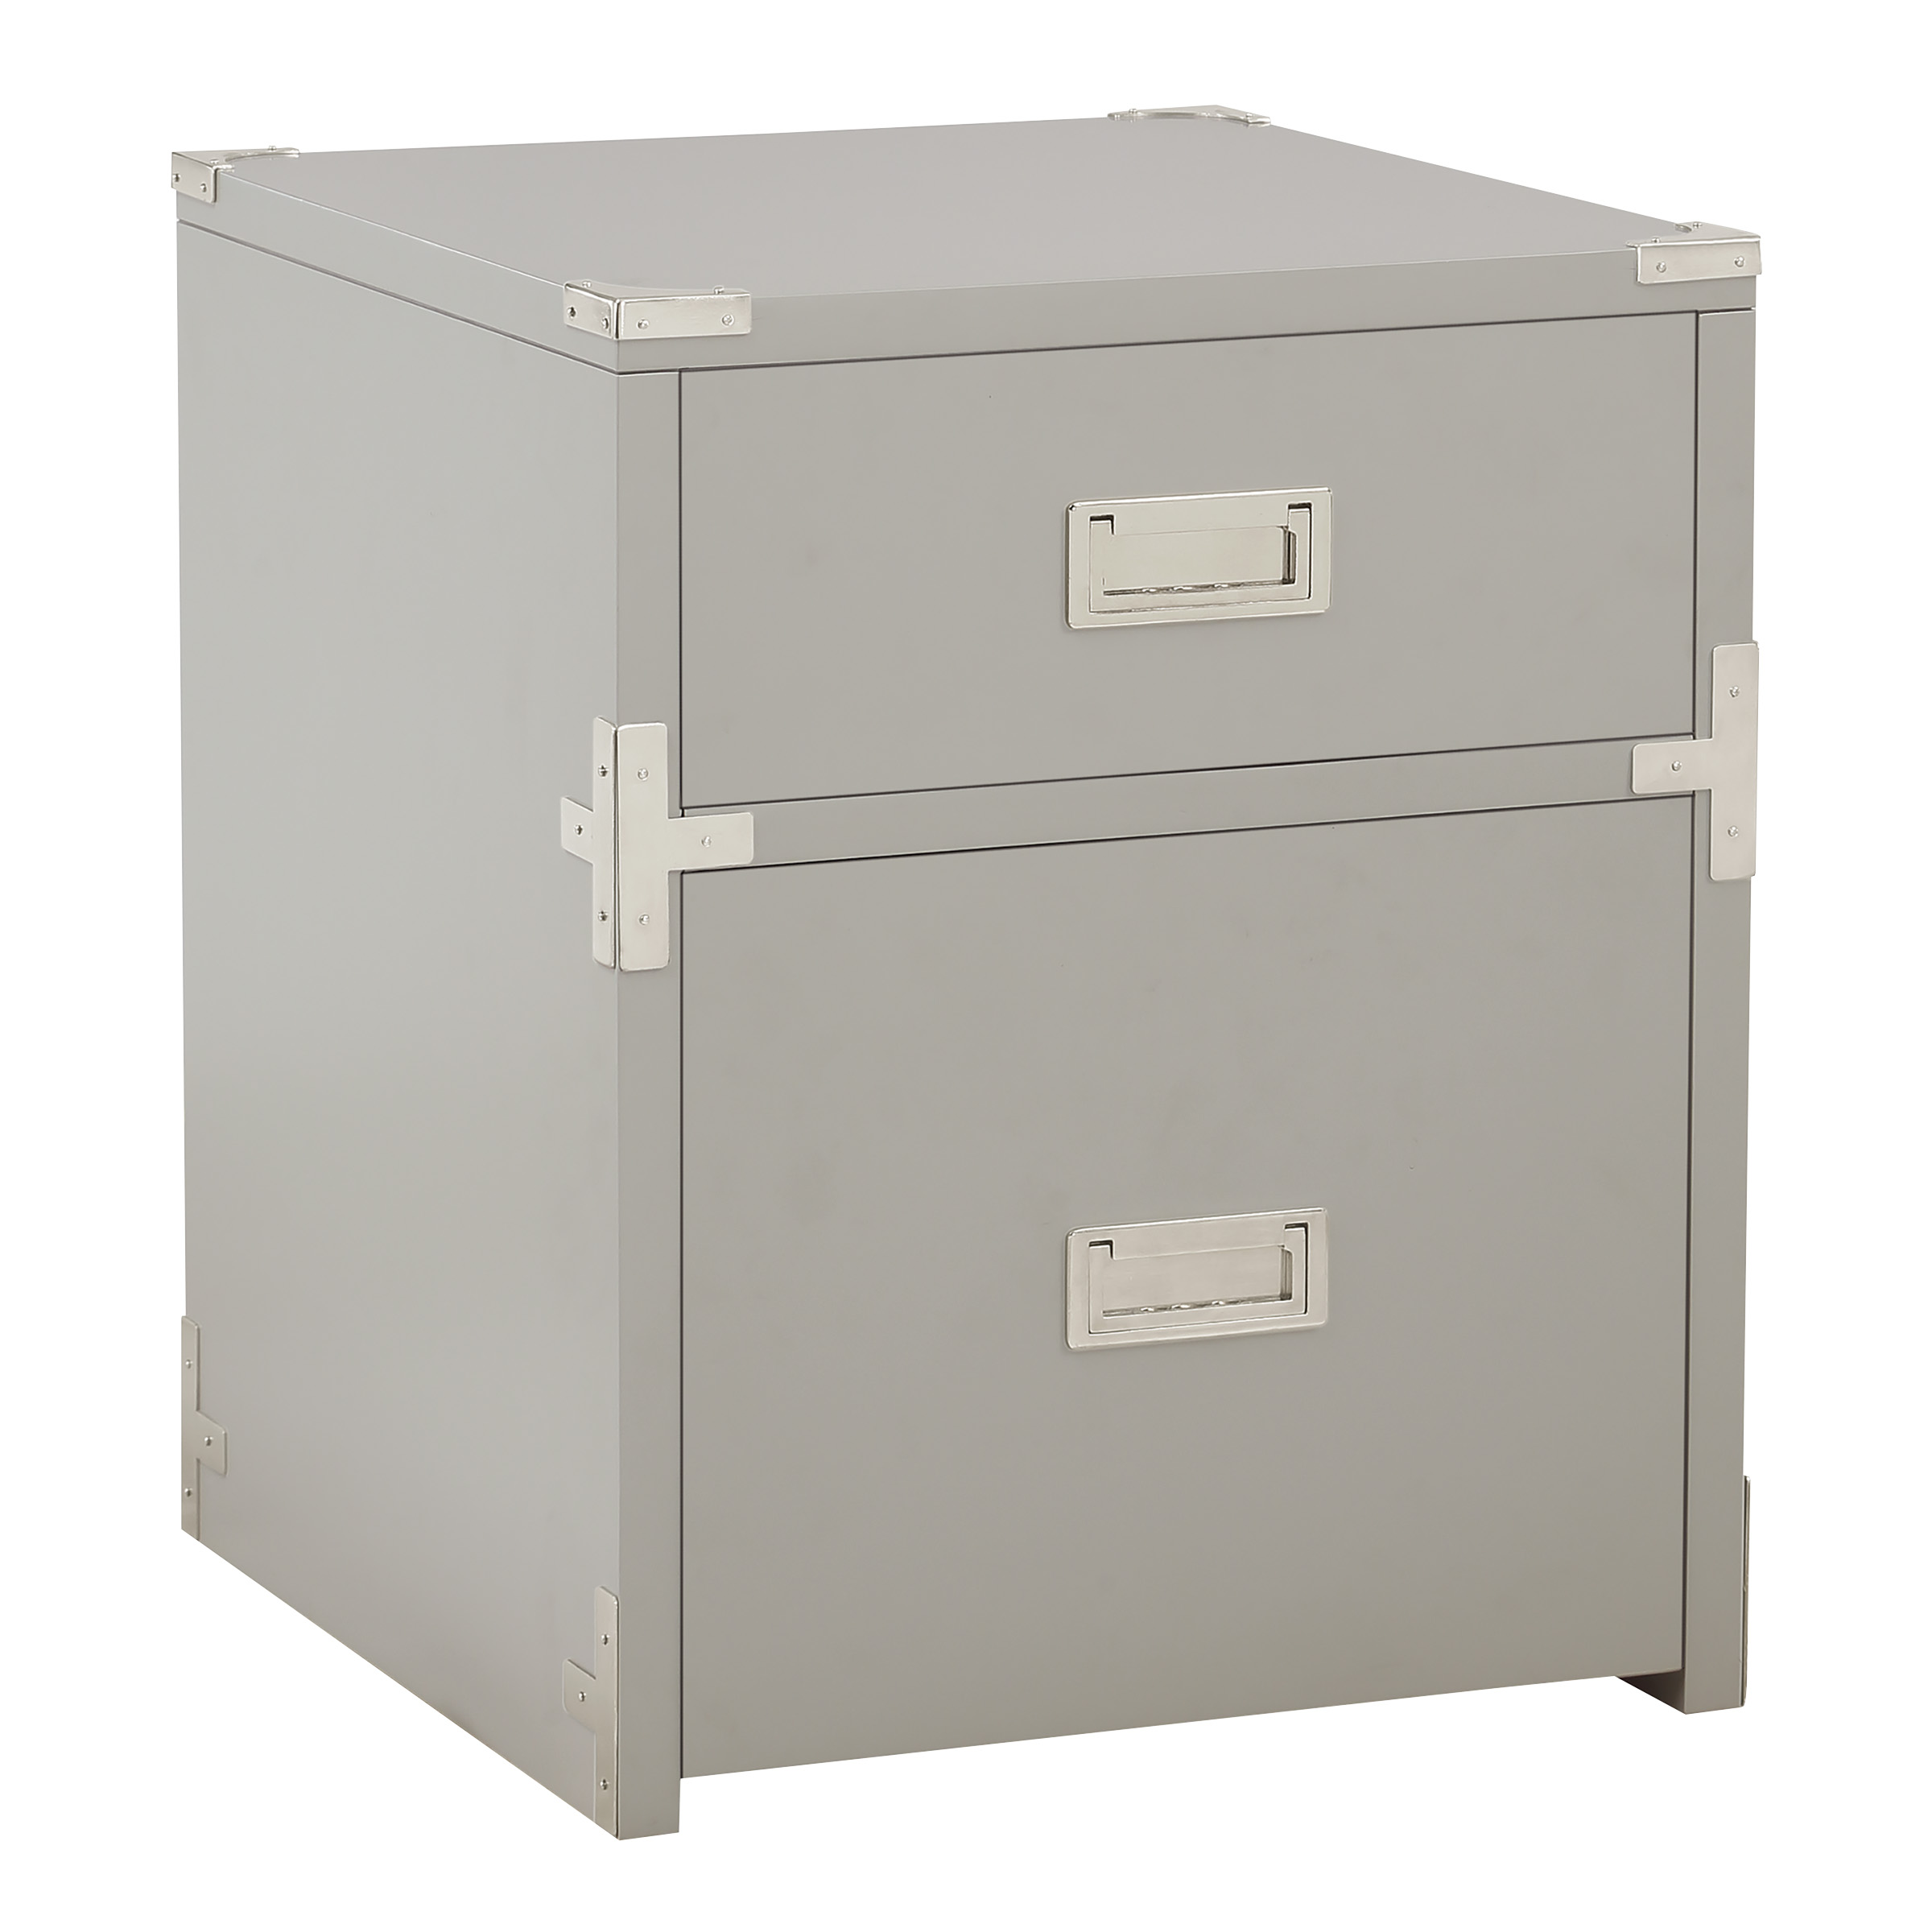 Wellington 2 Drawer Engineered Wood File Cabinet in Gray - image 1 of 8